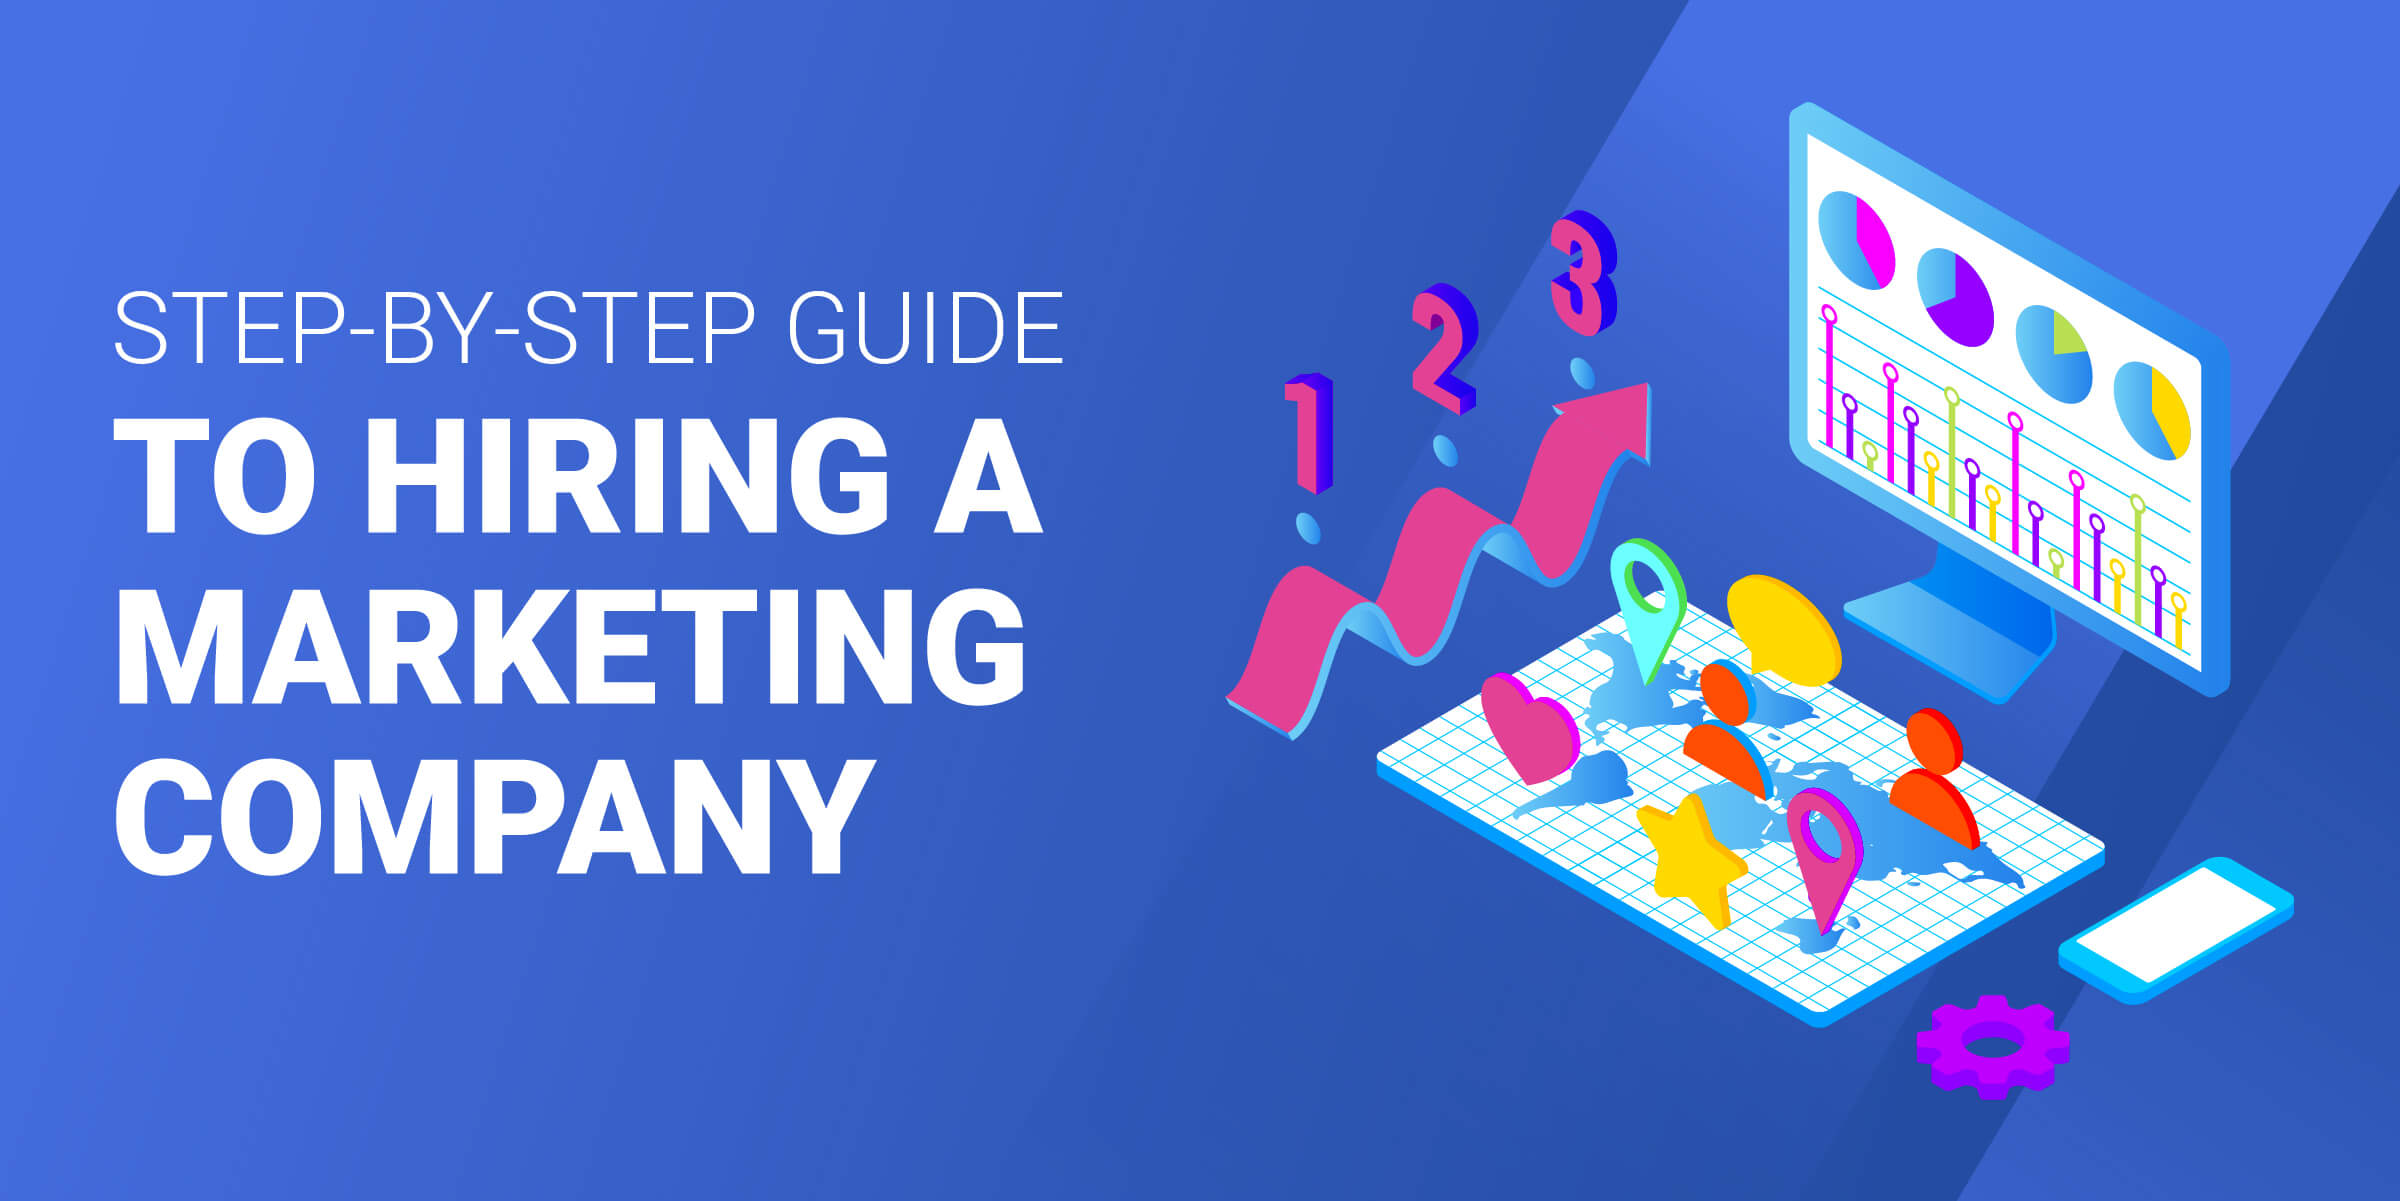 Step Guide to Hiring Marketing Company